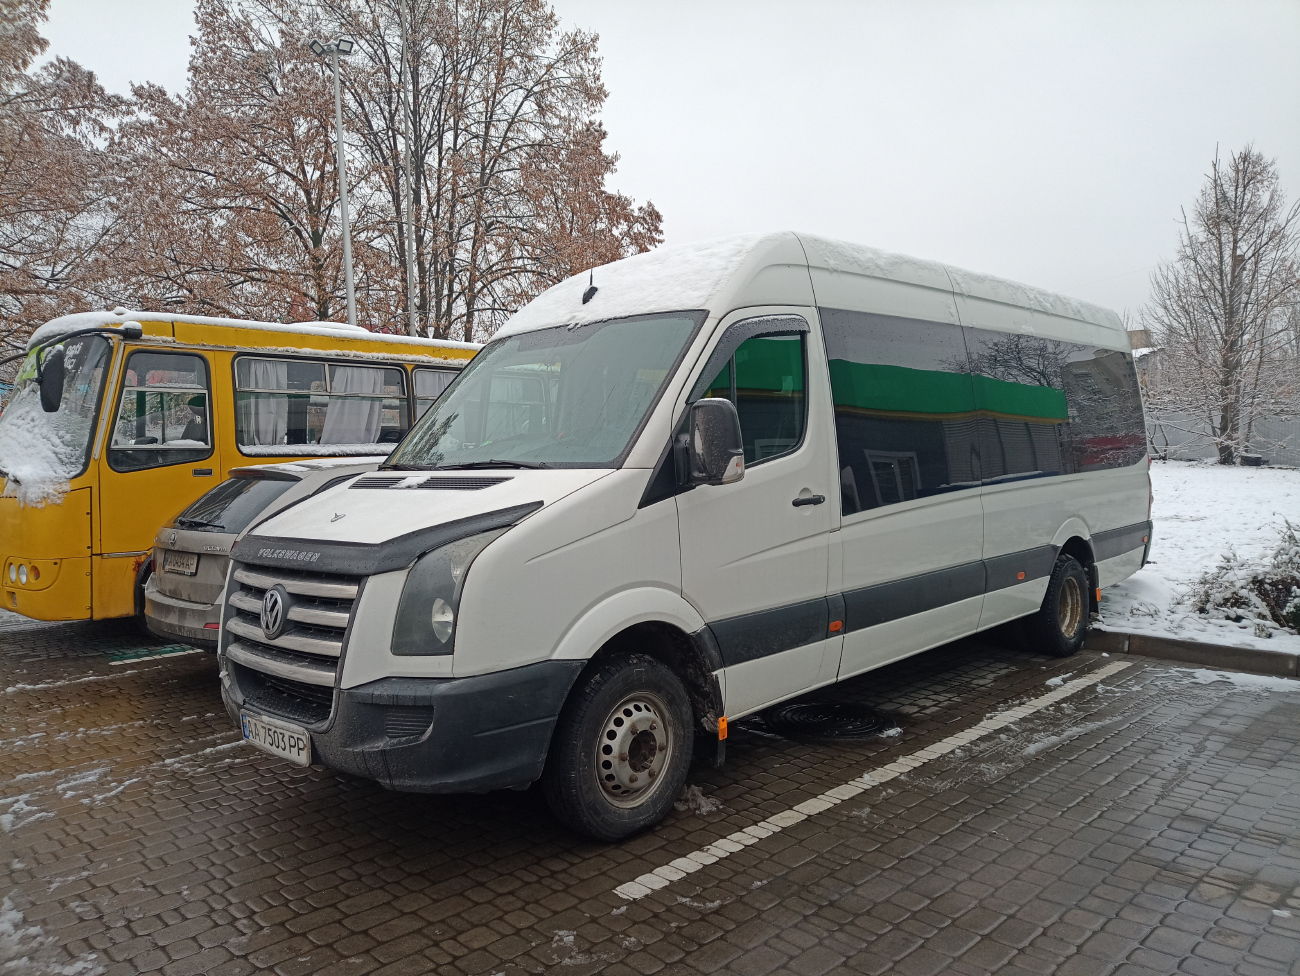 Kyiv, Carsport (VW Crafter) # АА 7503 РР